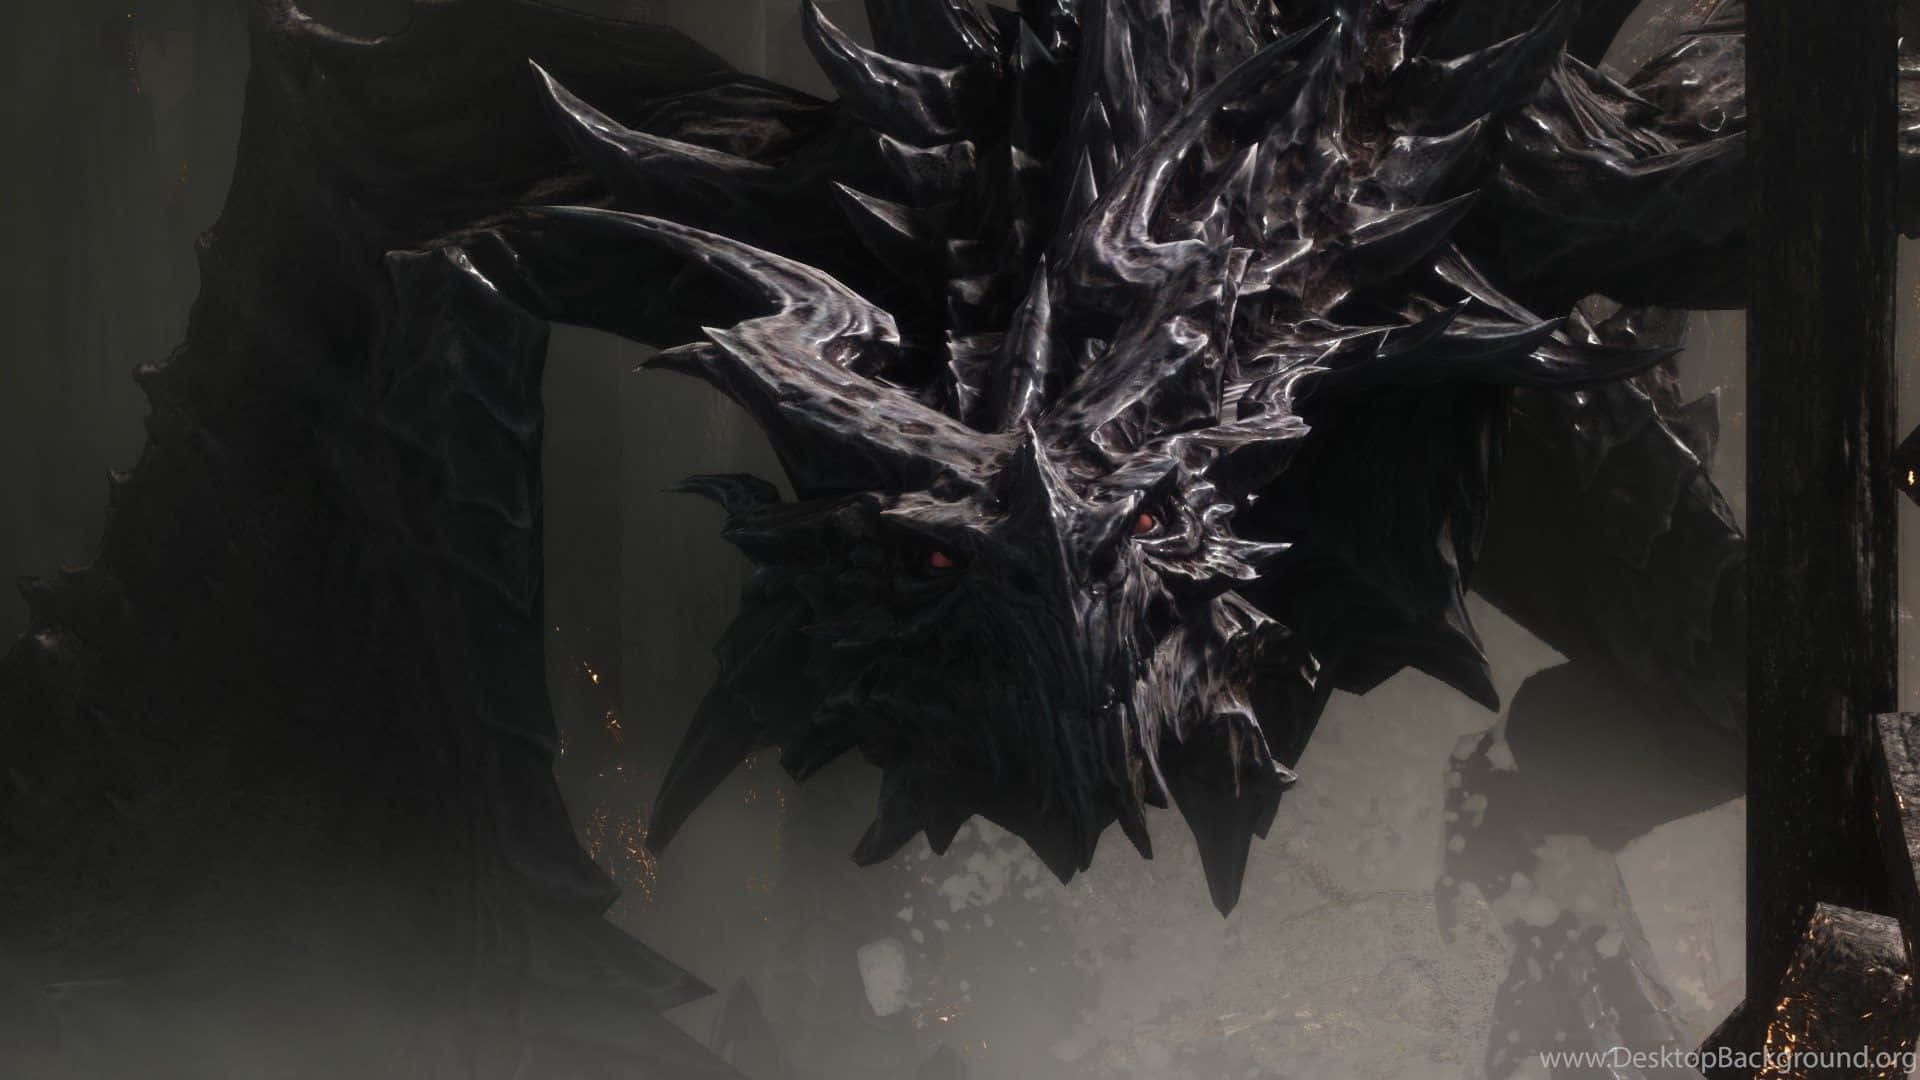 Alduin, the World-Eater Dragon, Unleashes His Wrath in Skyrim Wallpaper